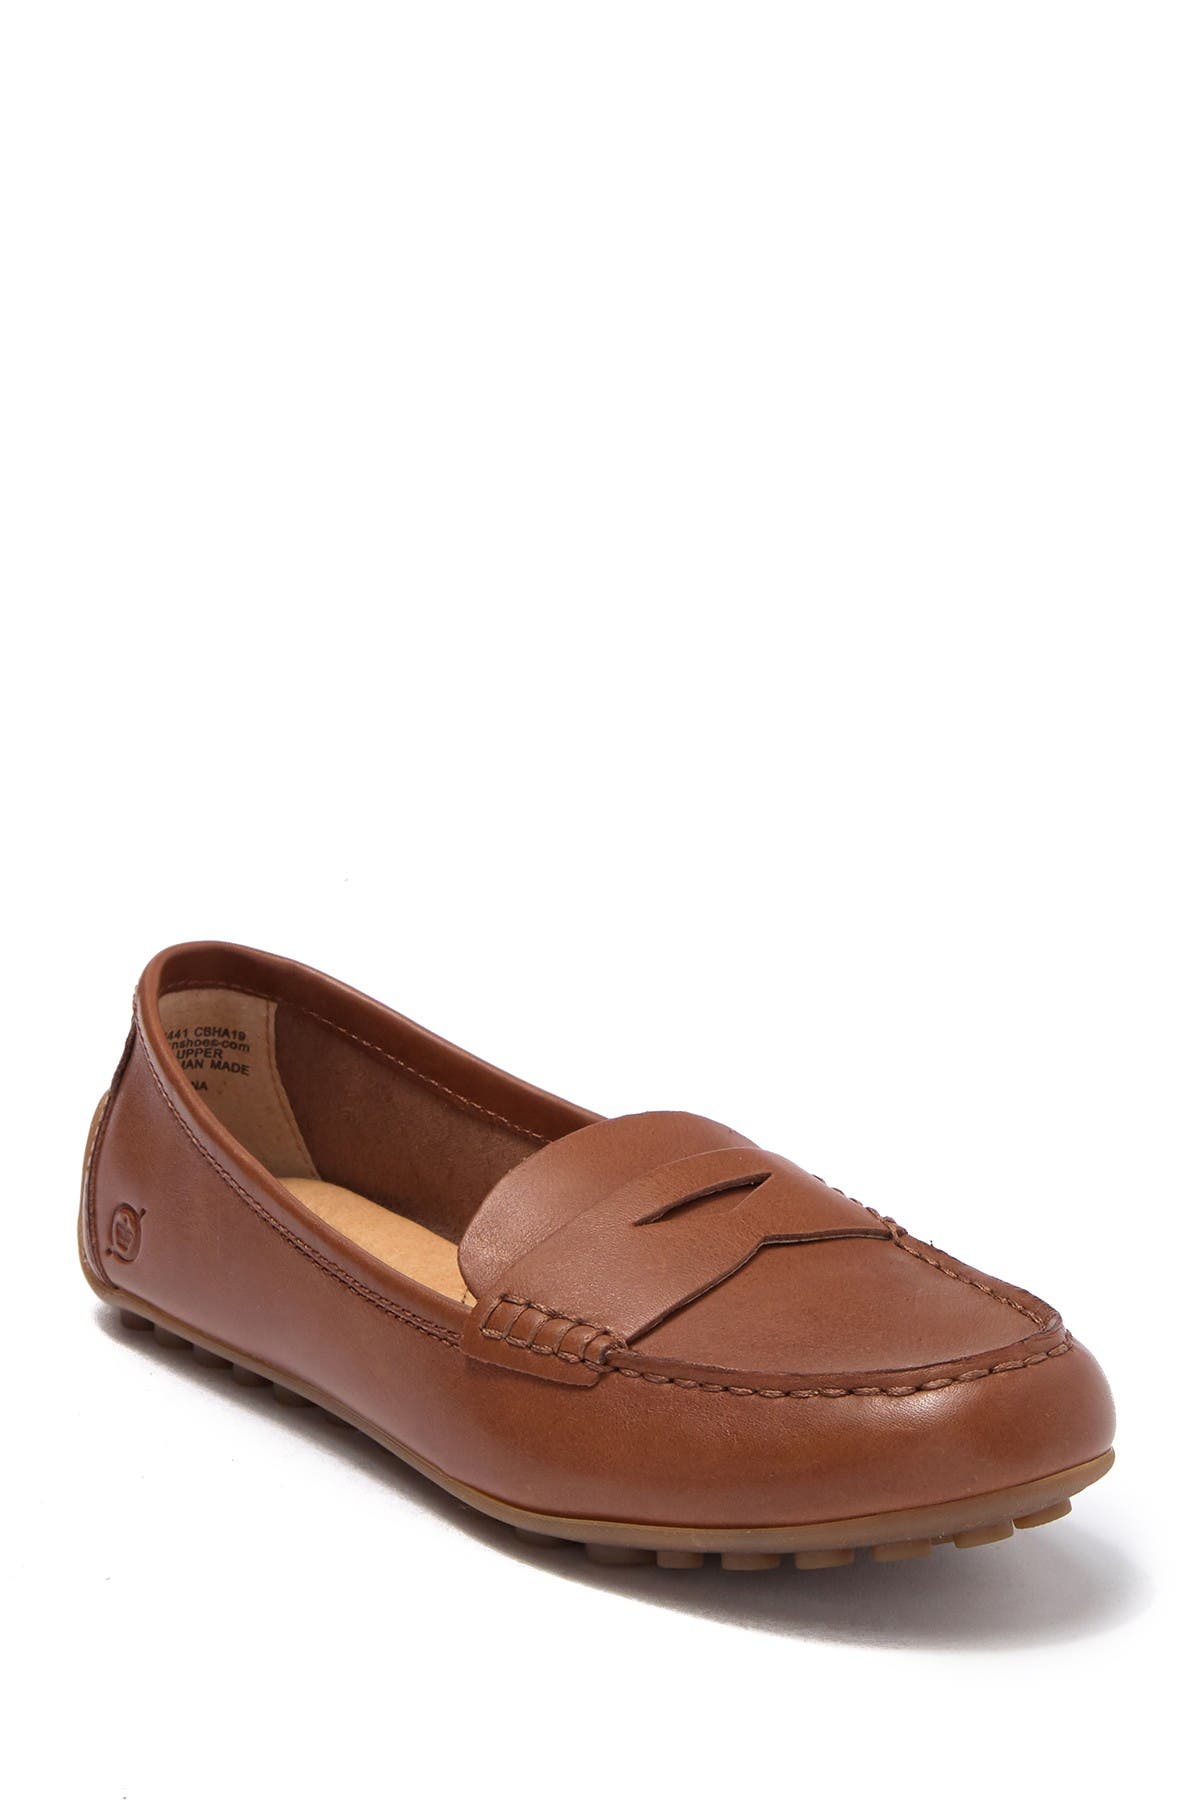 Born | Malena Leather Penny Loafer 